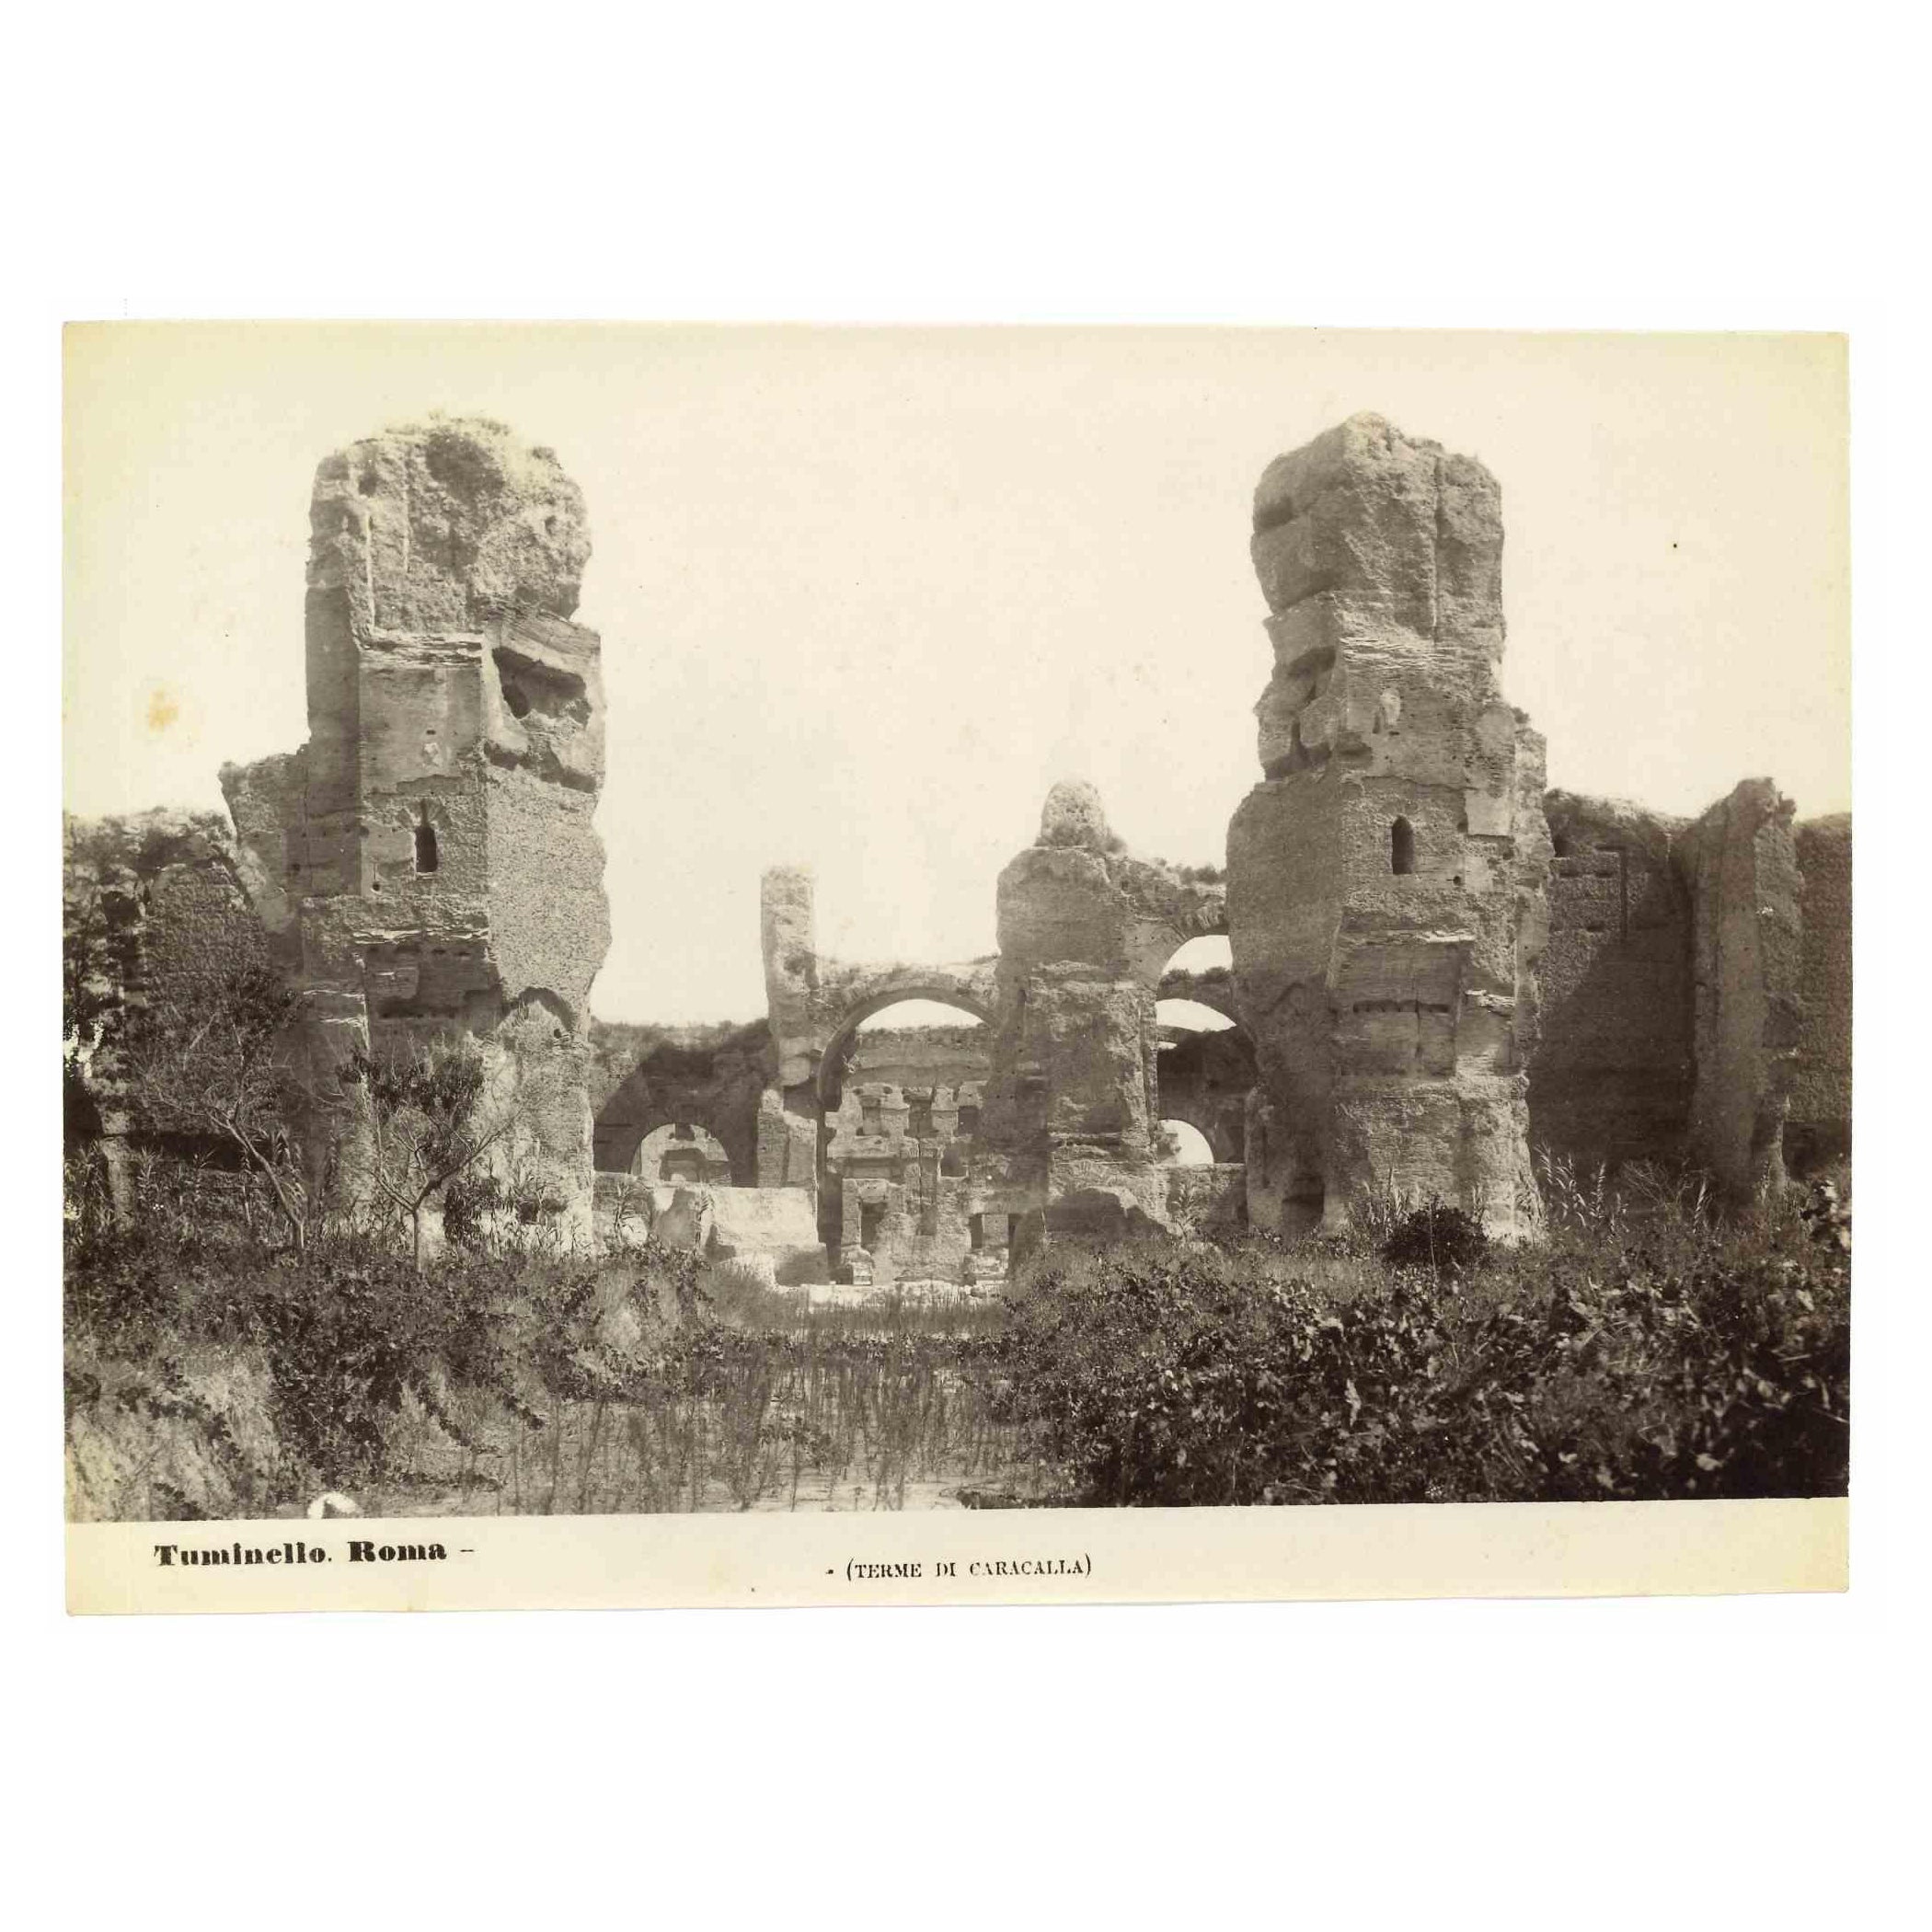 Baths of Caracalla is a vintage black and white photograph realized by the italian photographer Ludovico Tuminello in he early 20th Century,

Good conditions except for some foxing.

 